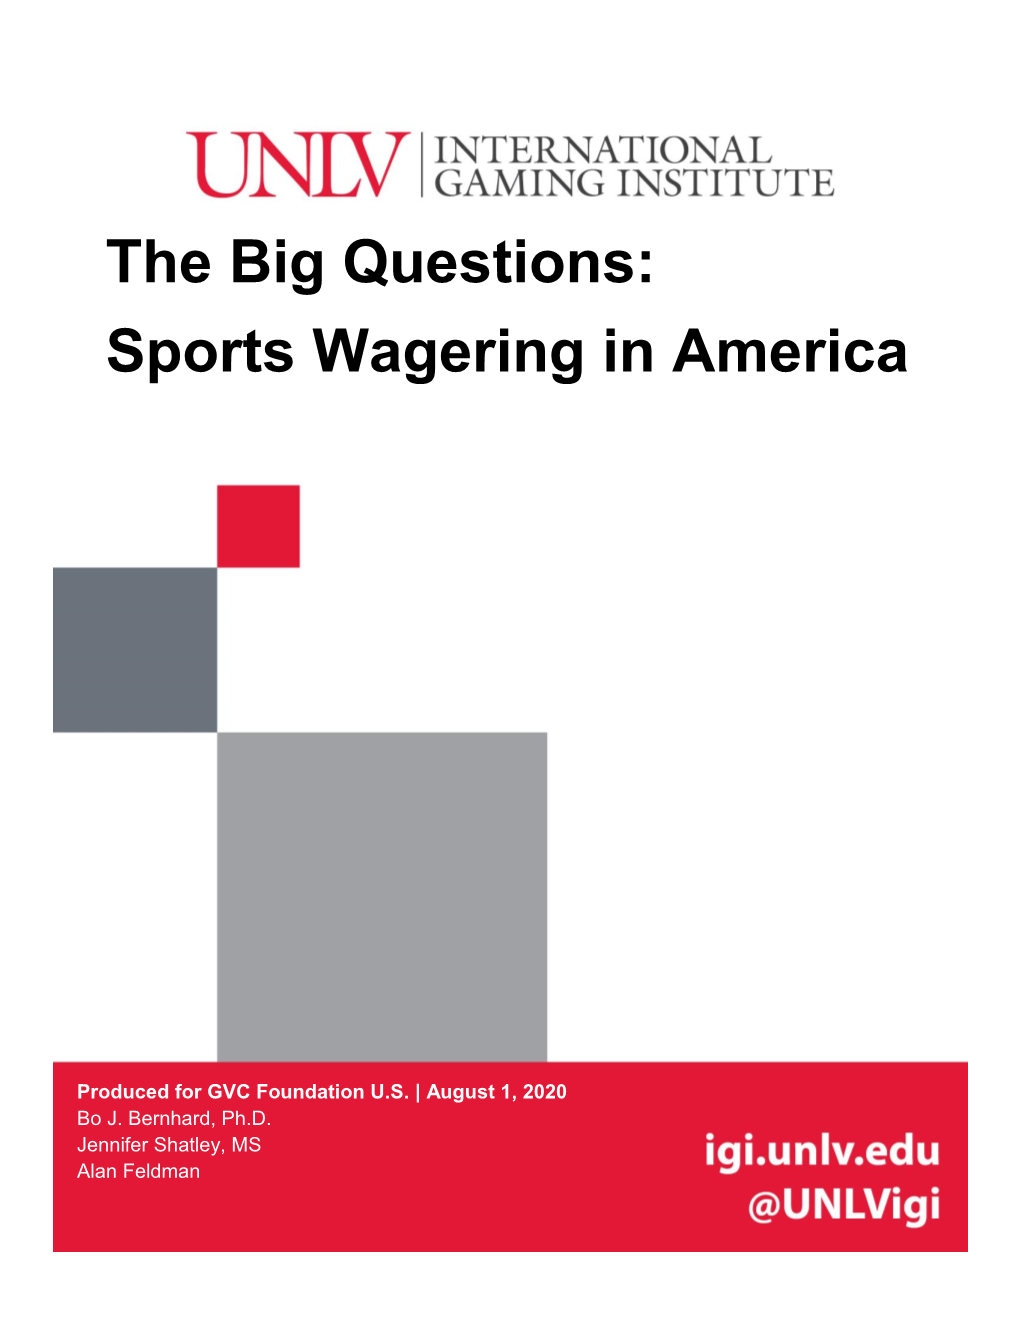 The Big Questions: Sports Wagering in America